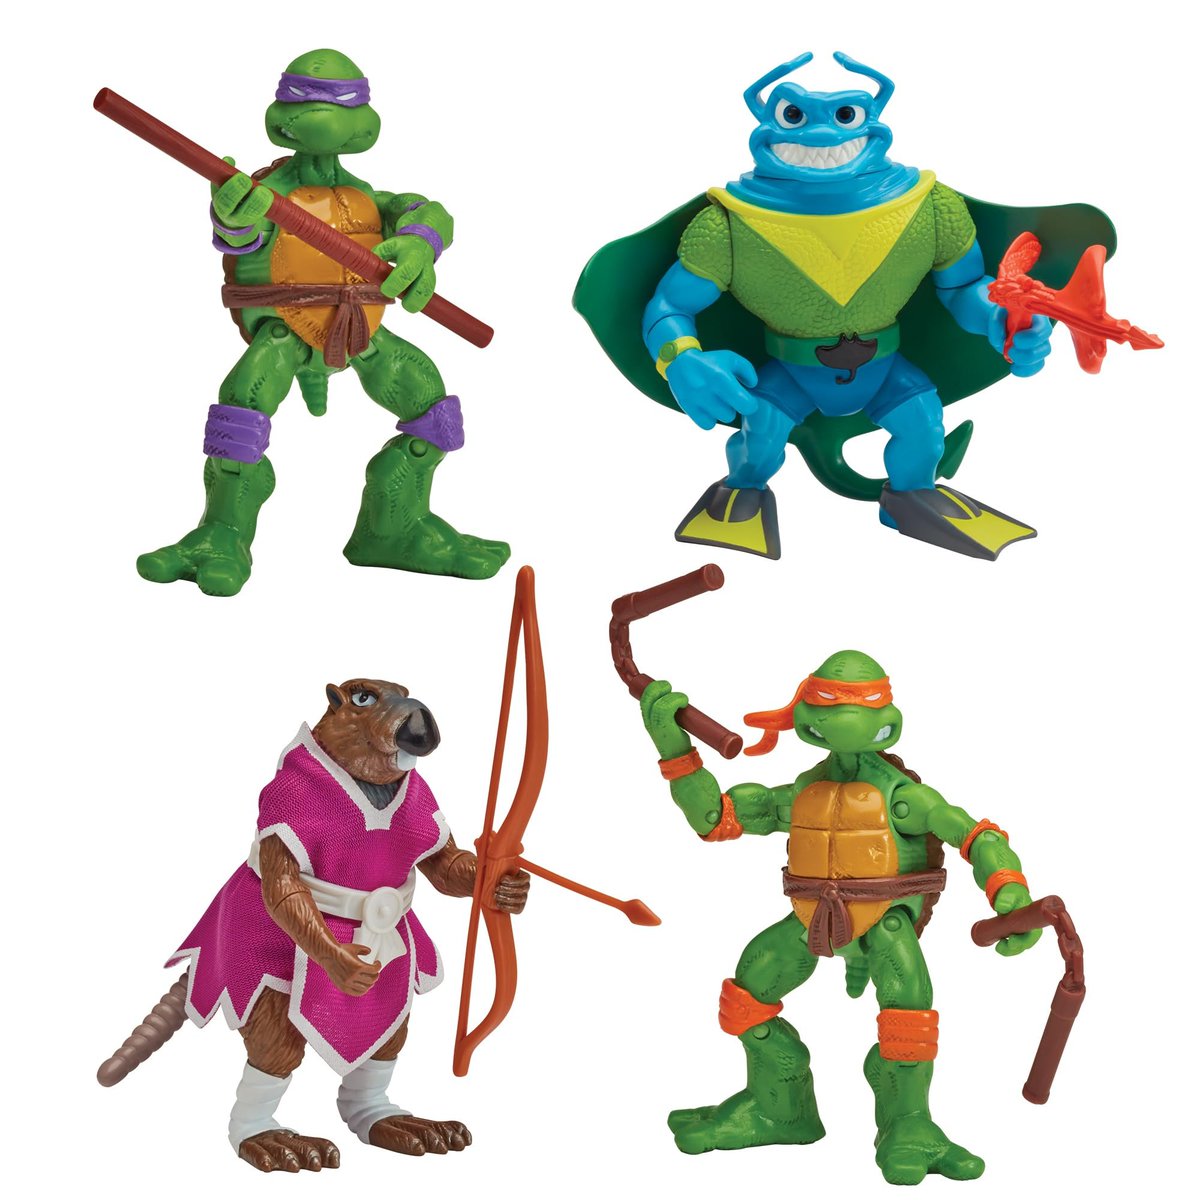 ⚠️🐢💥#UPDATE'D ALERT💥🐢⚠️ #Statoversians! 👁🌛👁 🫶 Amazon is price matching the TMNT Movie Stars 4-pack to ONLY ($17.79)! The TMNT Adventure Heroes 4-pack ALSO down to ONLY $26.66. #TMNT #toynews #dealoftheday TSO'VIN!! Teenage Mutant Ninja Turtles Classic Movie Stars…